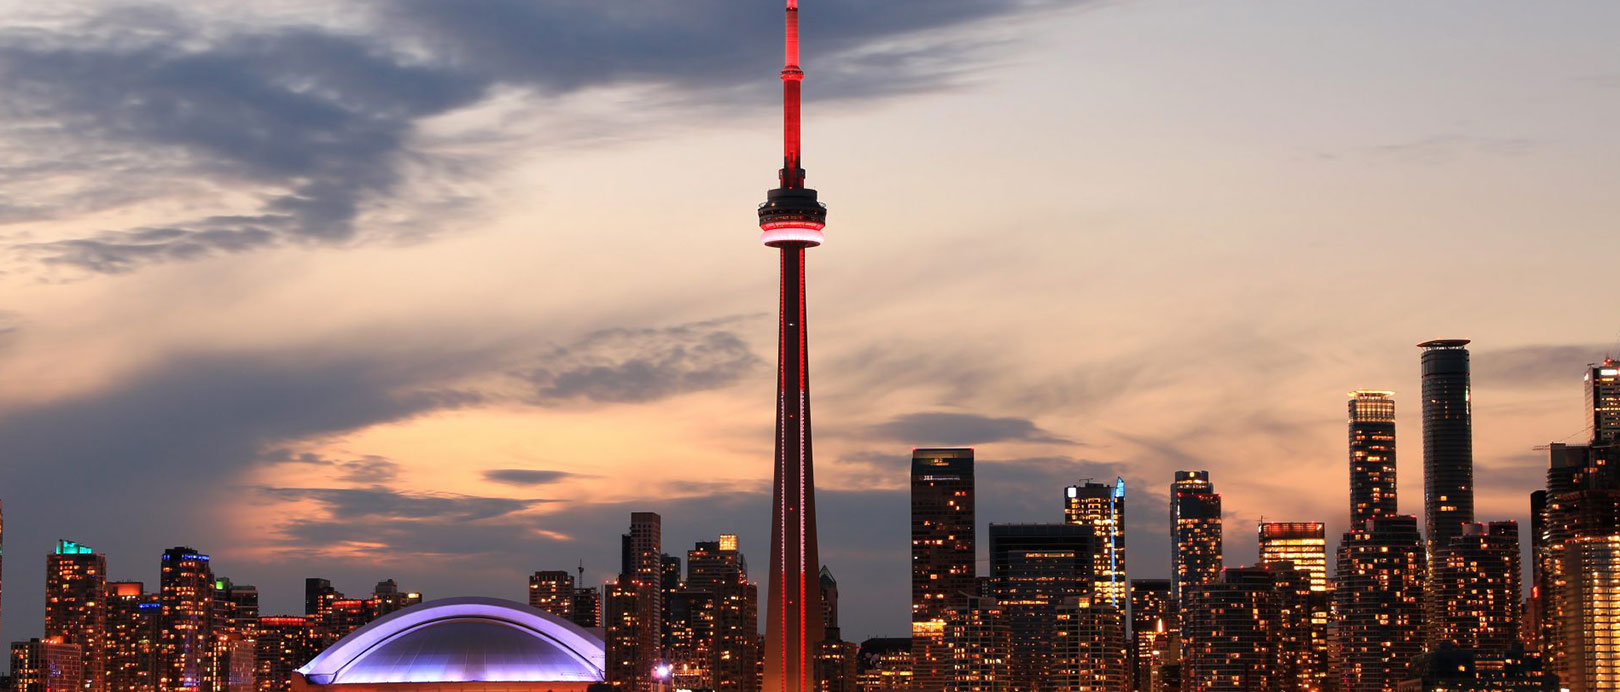 Top 5 places to visit in Toronto  Places to visit, Travel around the  world, Best cities